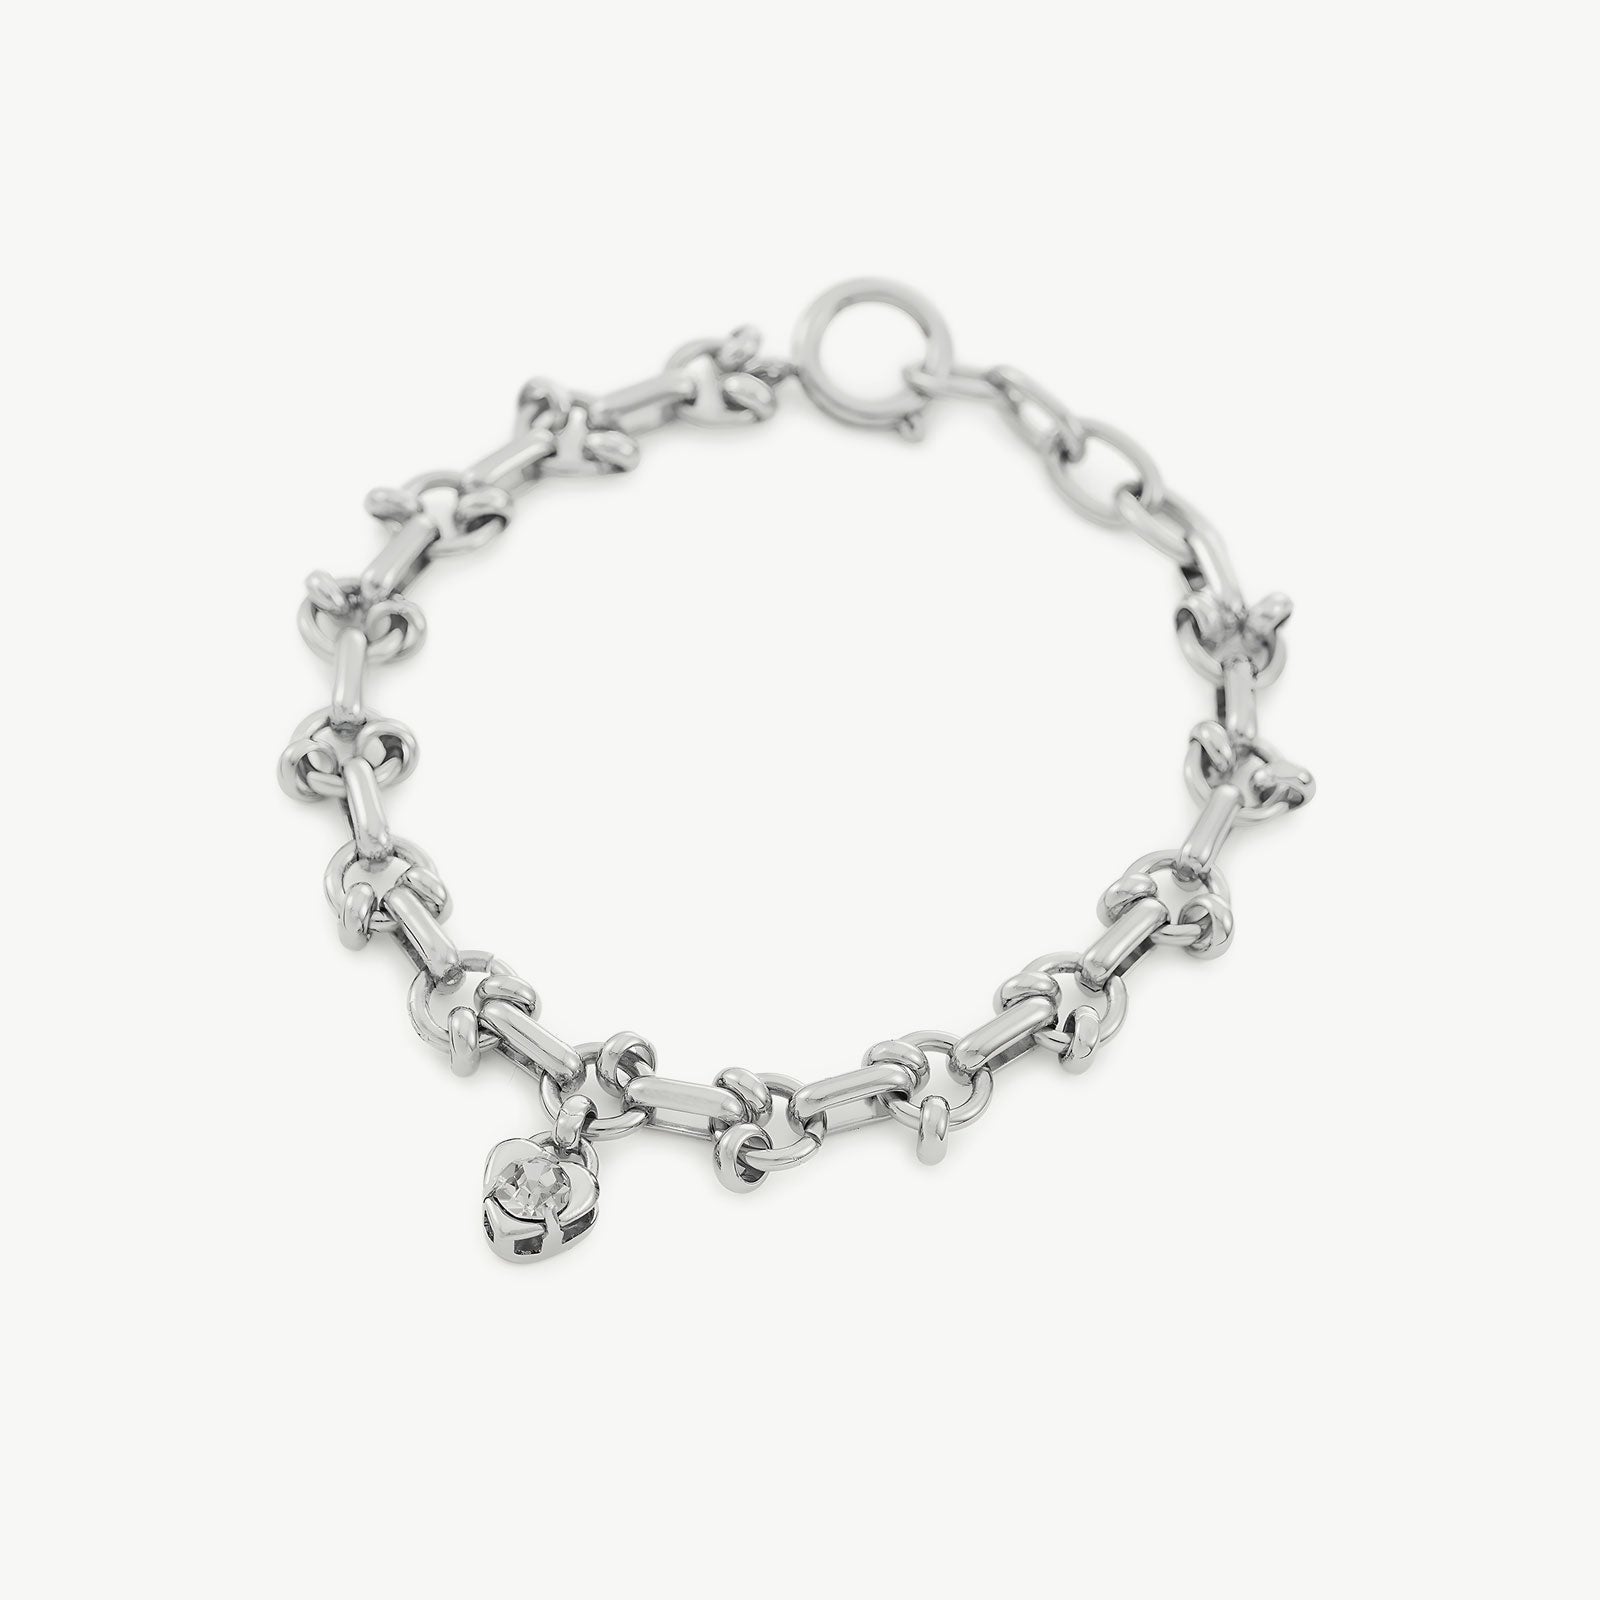 Diamond Heart Chain Bracelet in White Gold, a timeless piece that radiates with sophistication, this bracelet features a delicate chain adorned with diamond-studded hearts, set in a luminous white gold setting